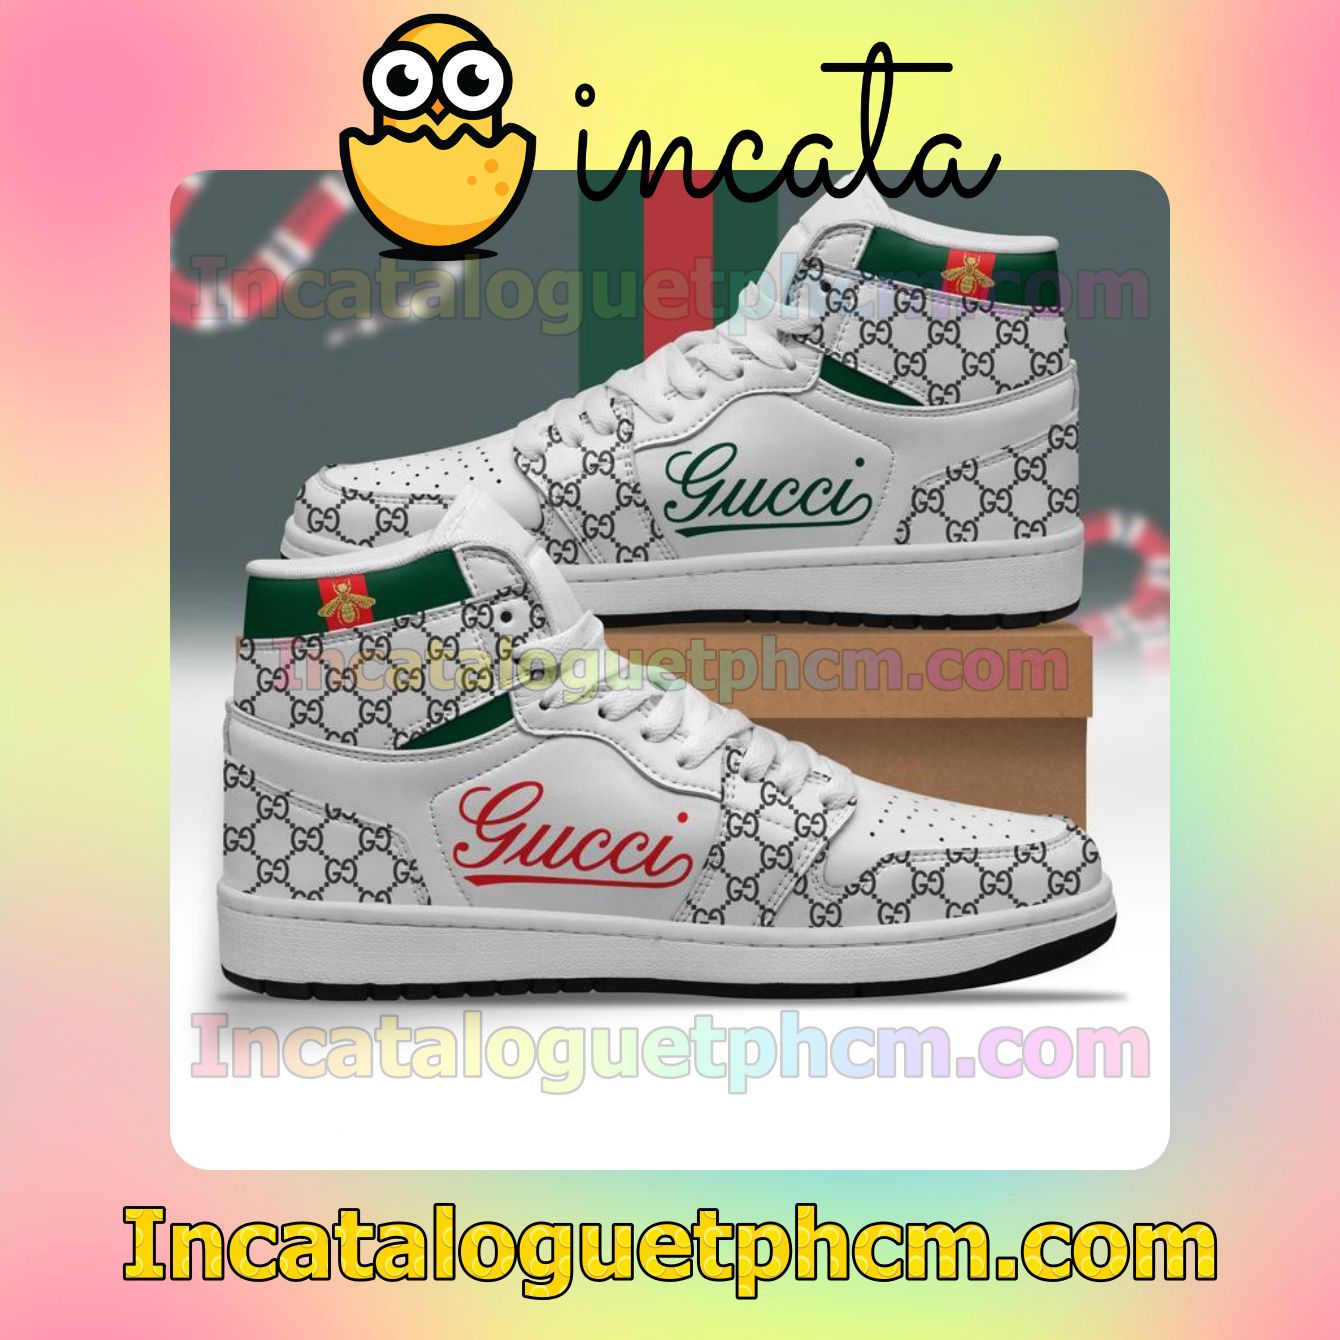 Gucci Bee White Air Jordan 1 Inspired Shoes